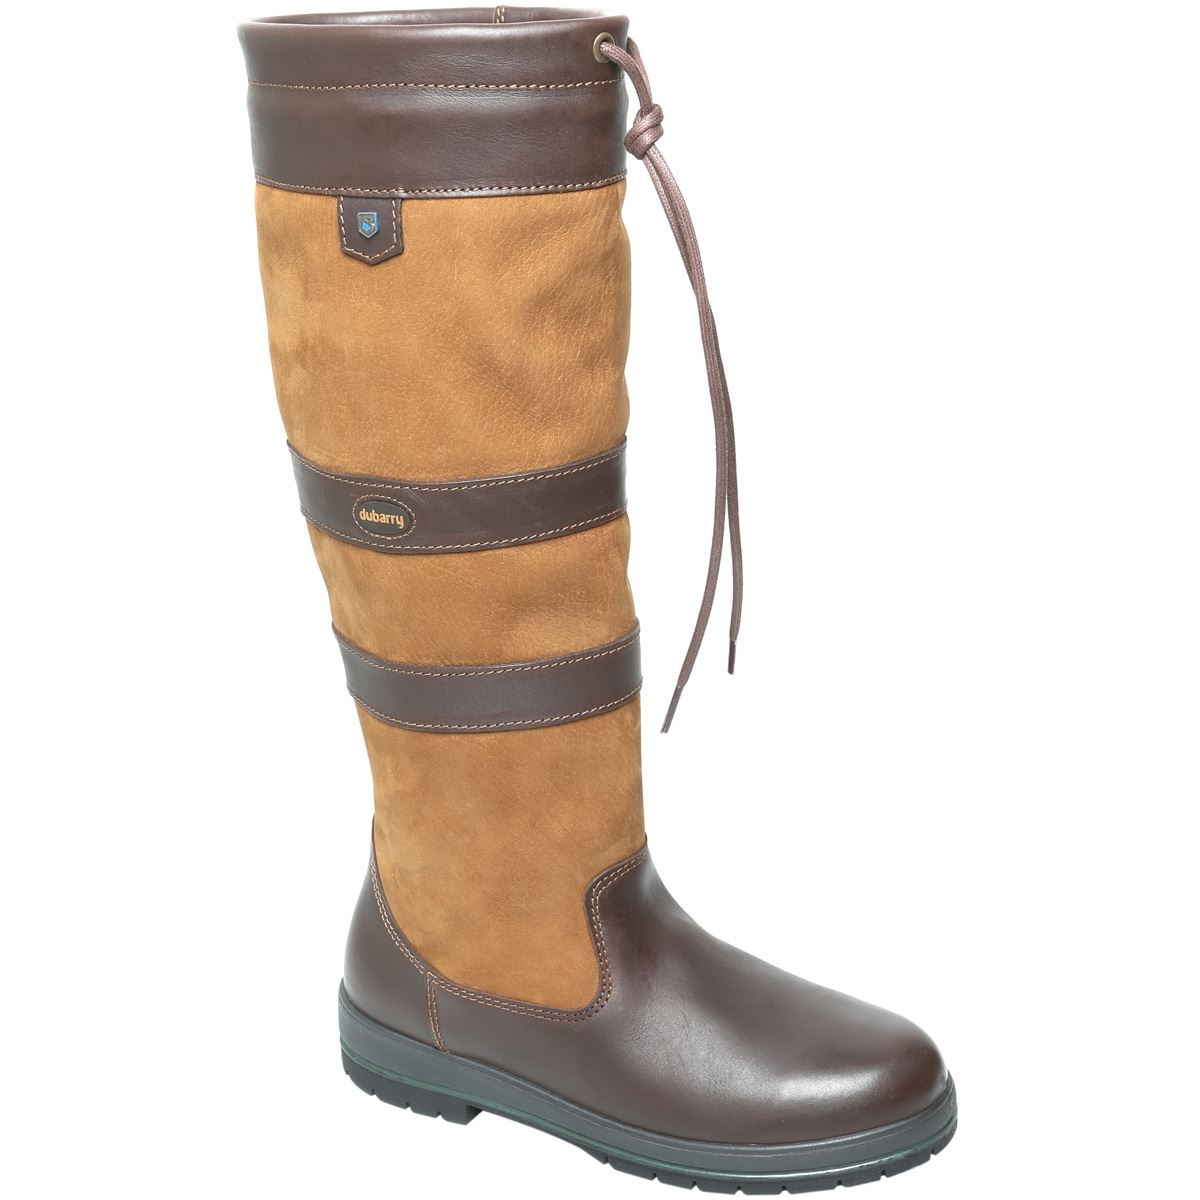 Do the Dubarry Galway Boots run small, should I size up from my normal size?